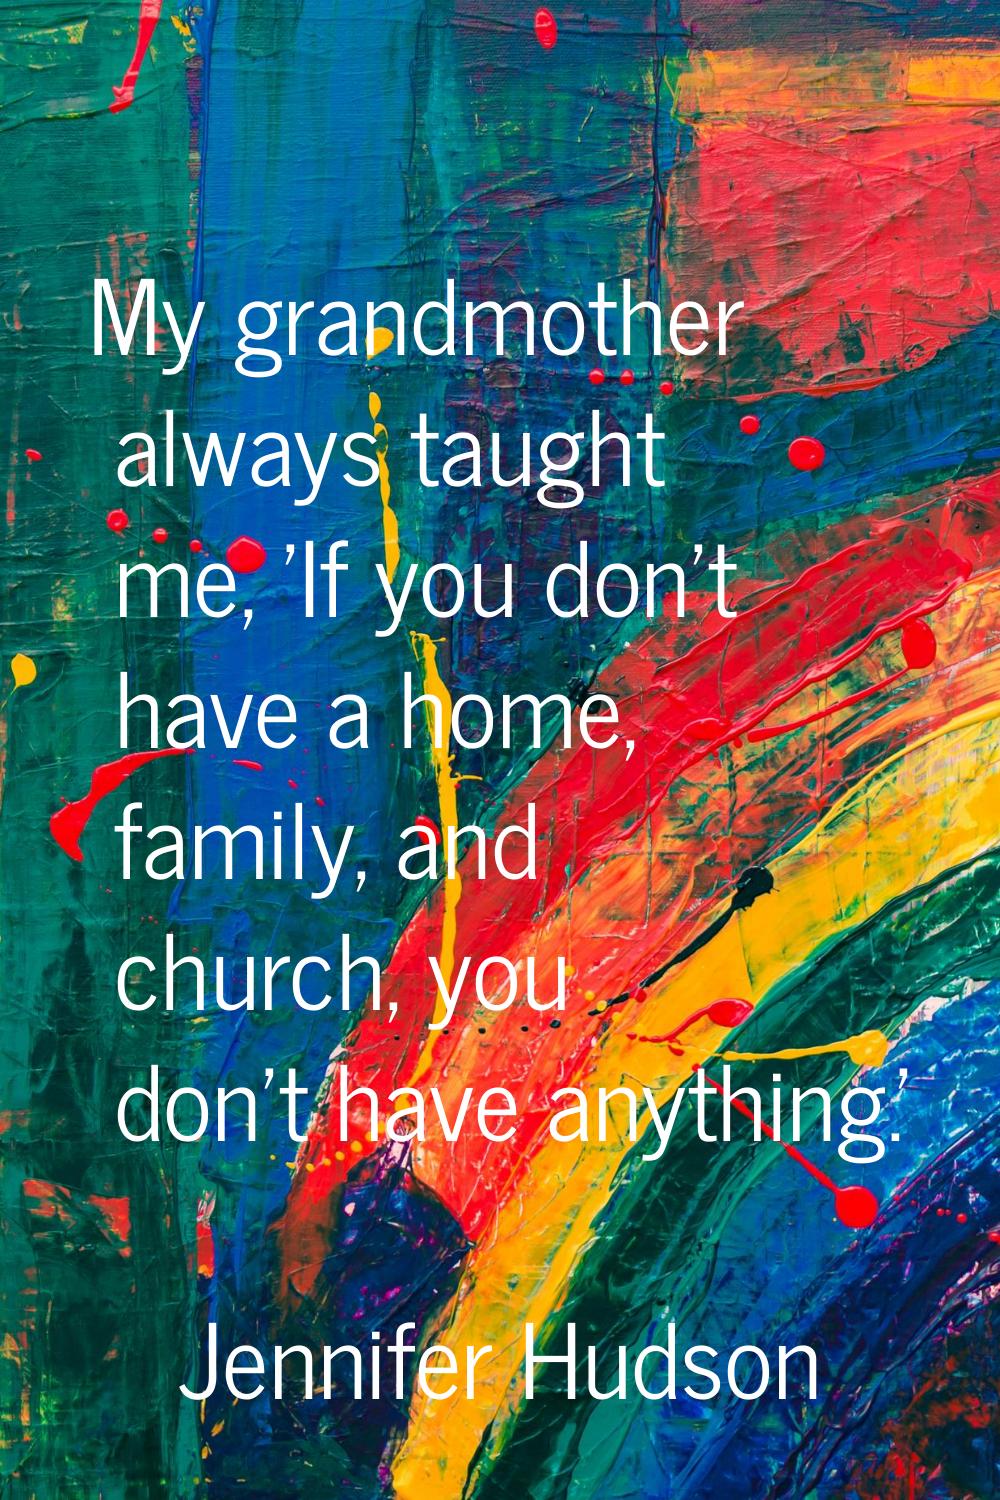 My grandmother always taught me, 'If you don't have a home, family, and church, you don't have anyt